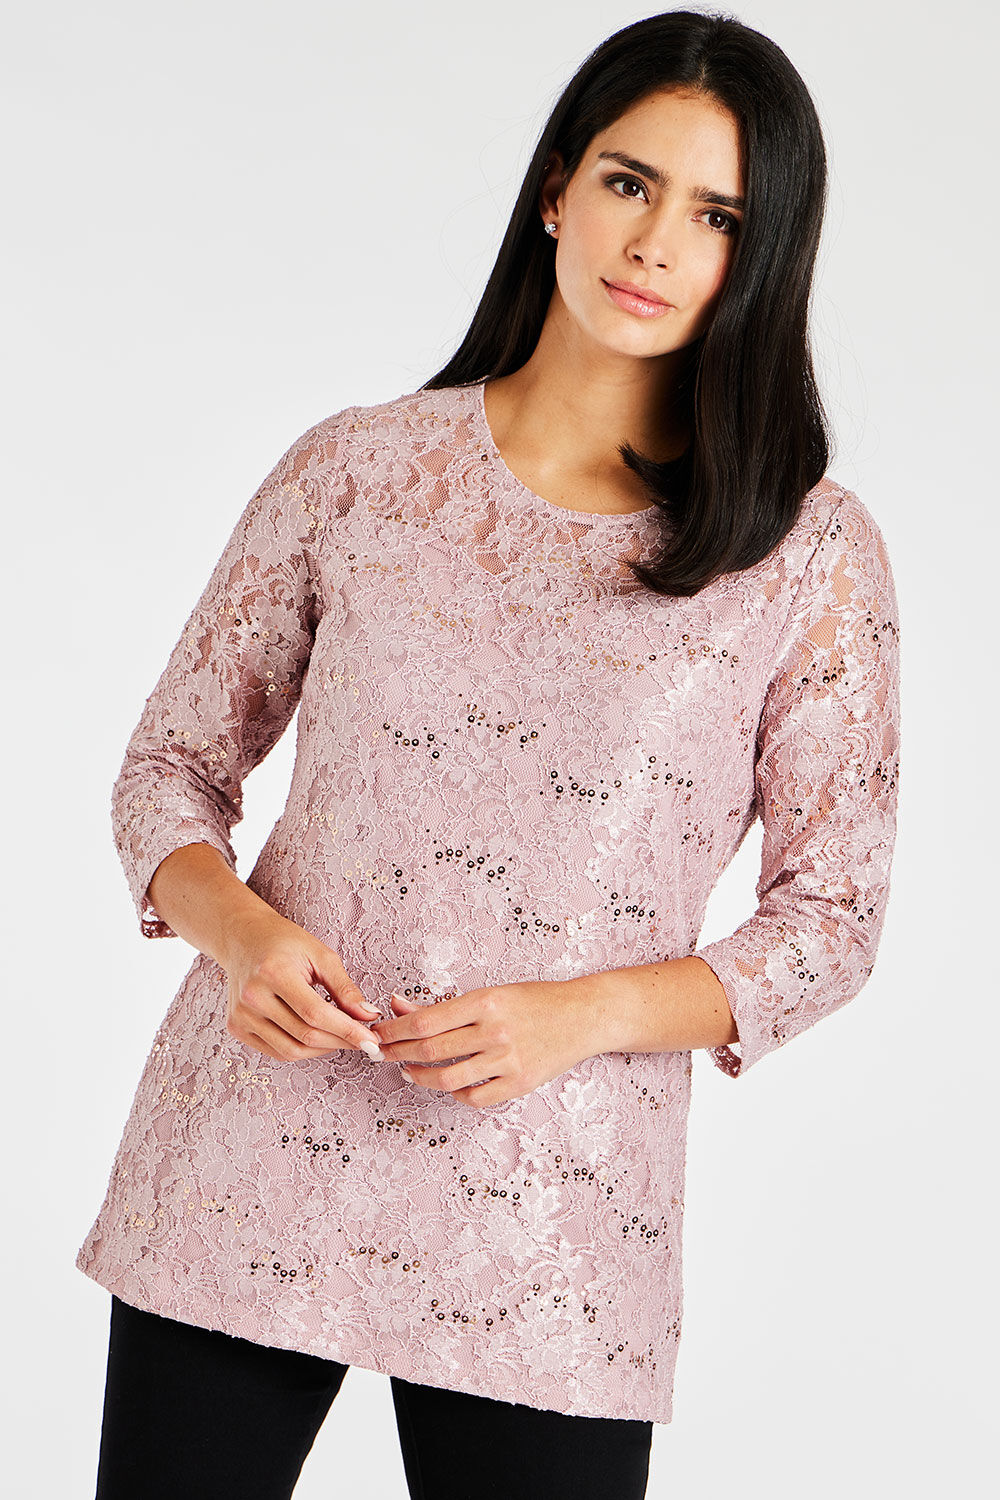 Bonmarche Pale Pink 3/4 Sleeve Sequin and Lace Tunic, Size: 10